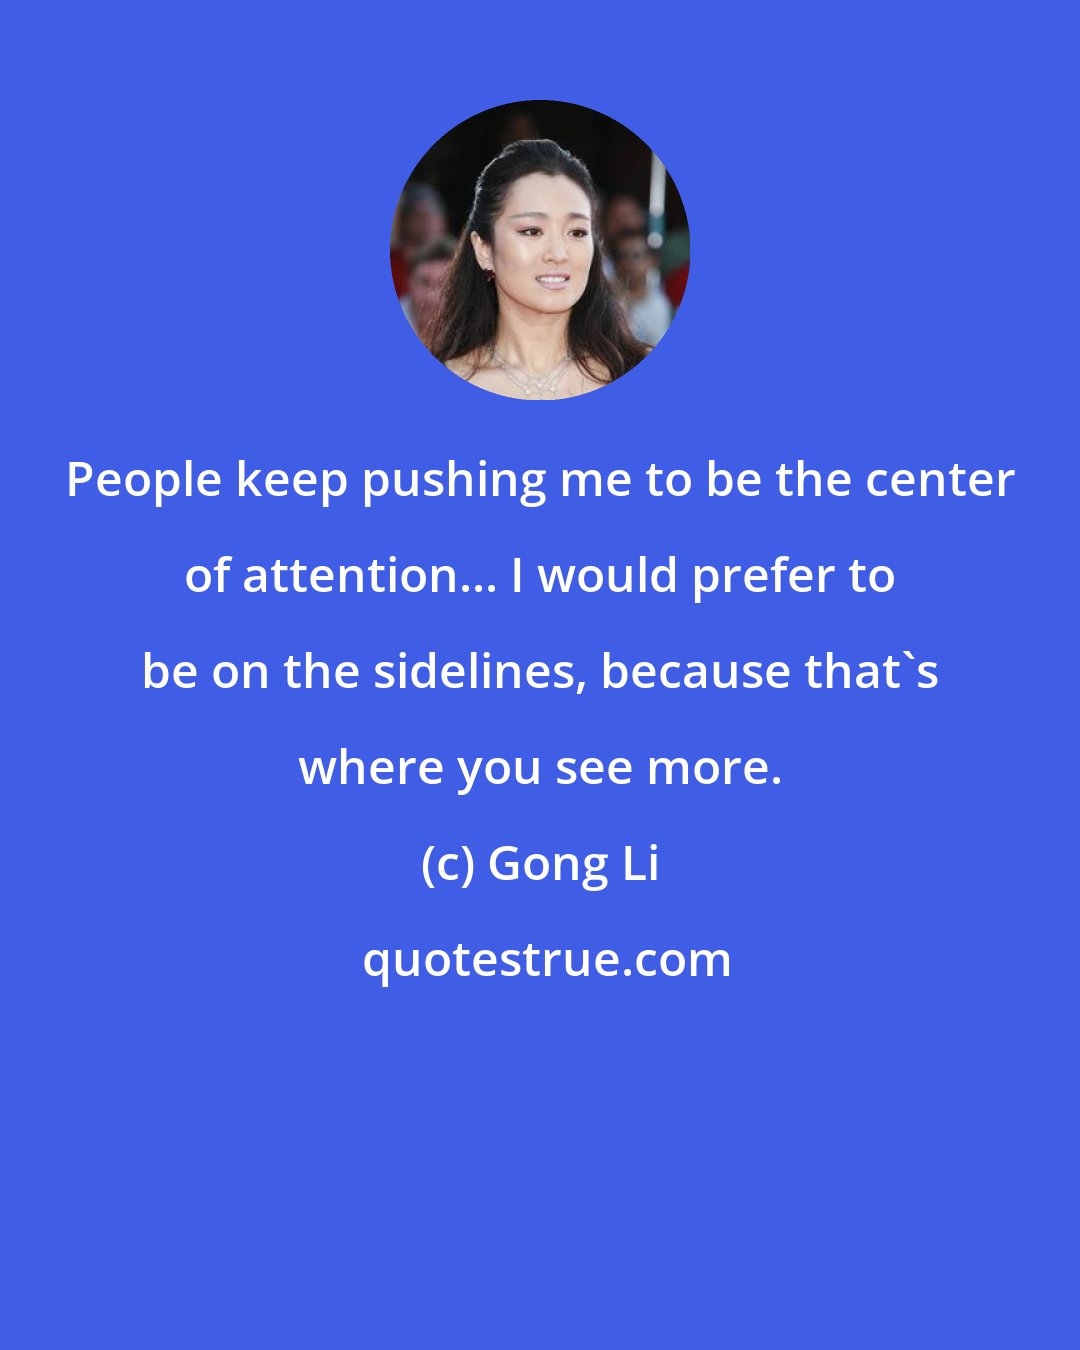 Gong Li: People keep pushing me to be the center of attention... I would prefer to be on the sidelines, because that's where you see more.